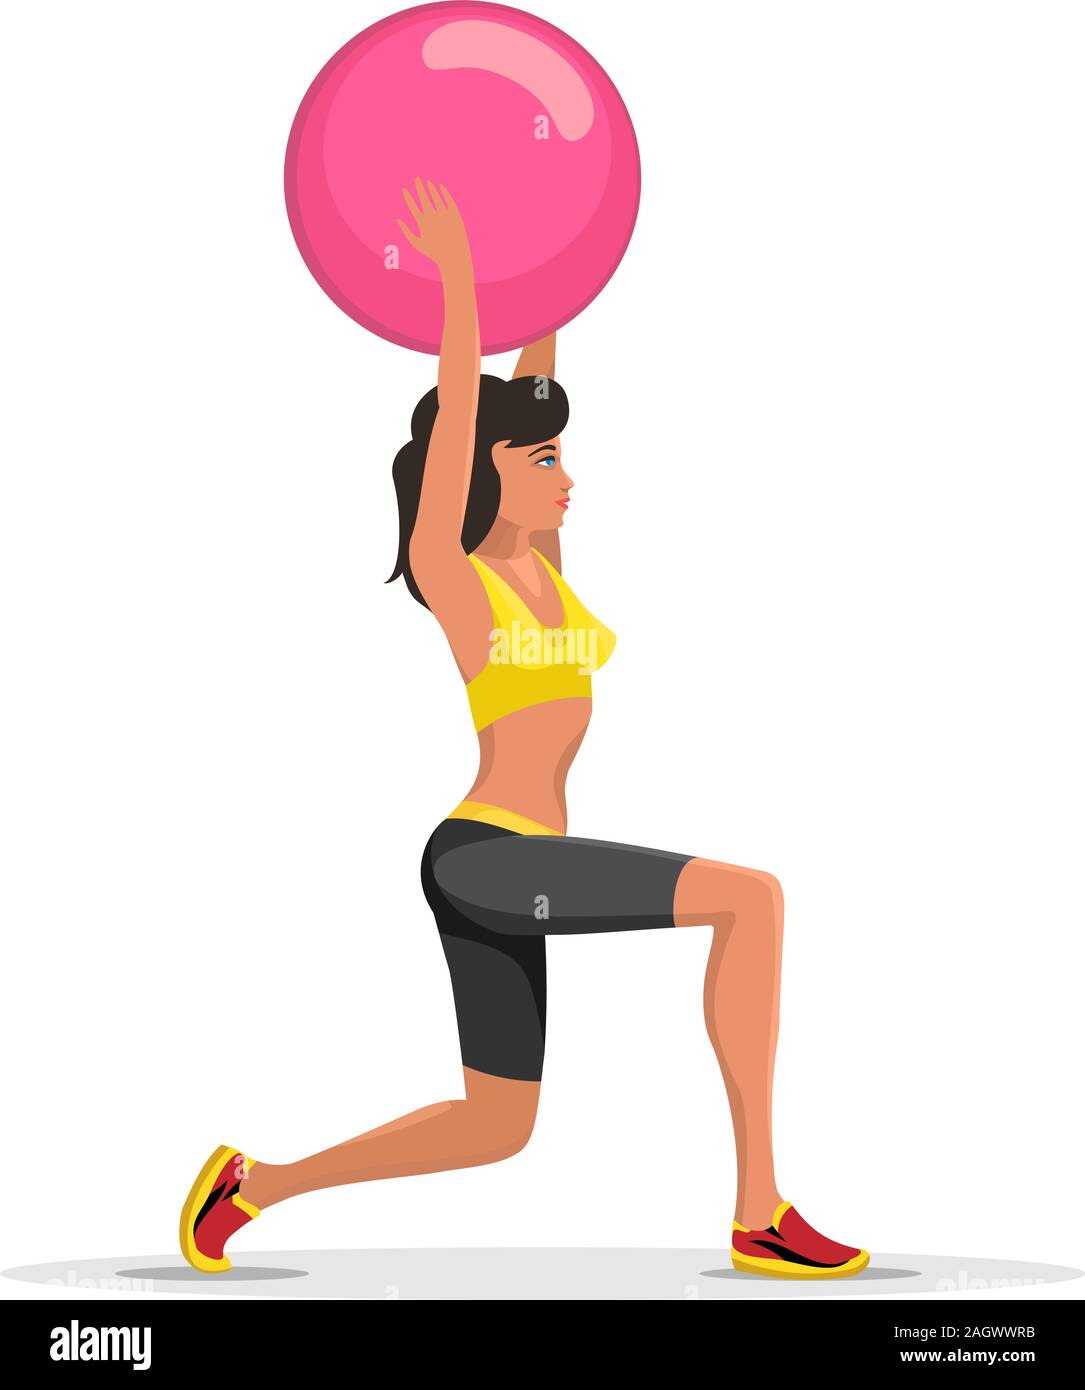 Fitness Woman Exercising With Ball. Fitness yoga ball emblem isolated on white. Vector illustration. Stock Vector